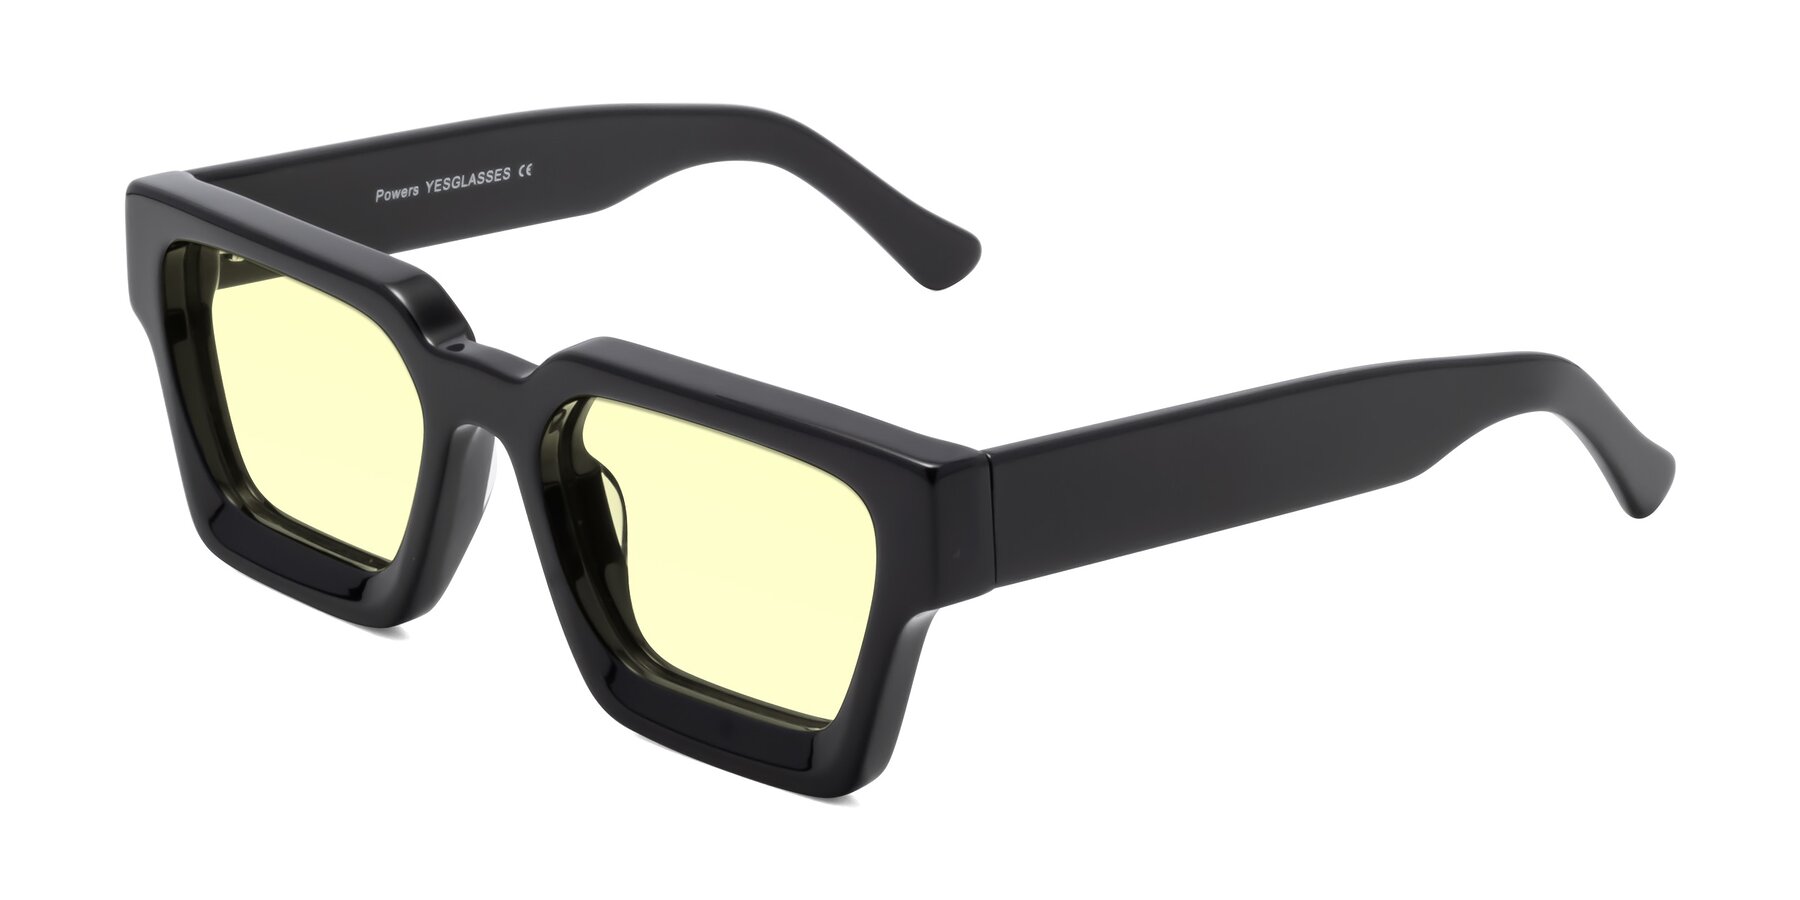 Angle of Powers in Black with Light Yellow Tinted Lenses